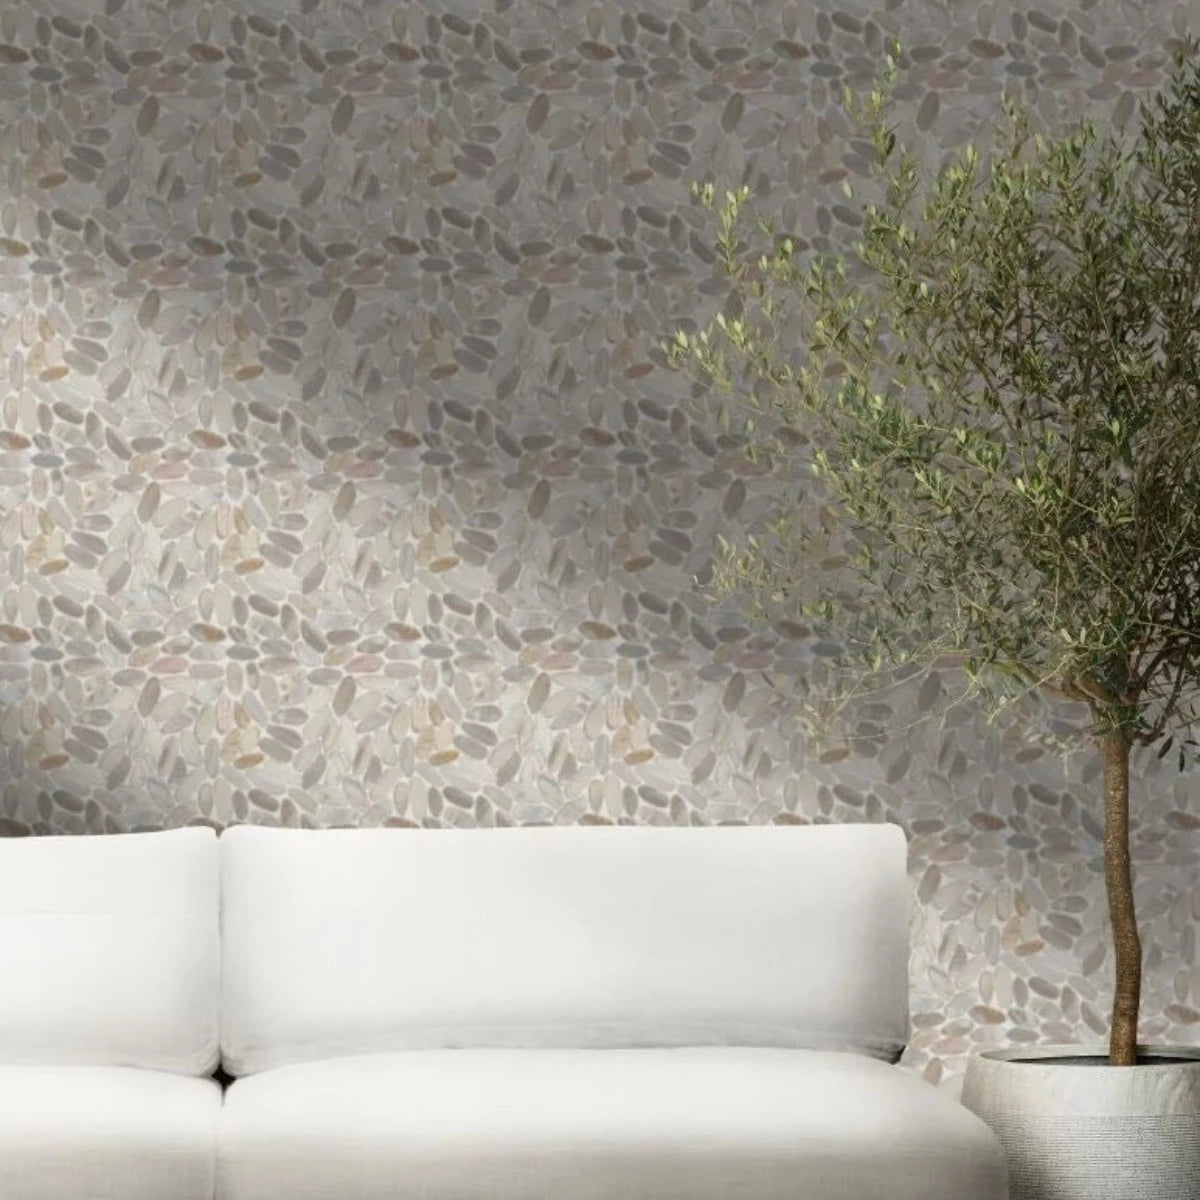 pebble tile wall with white couch in front along with a decorative tree